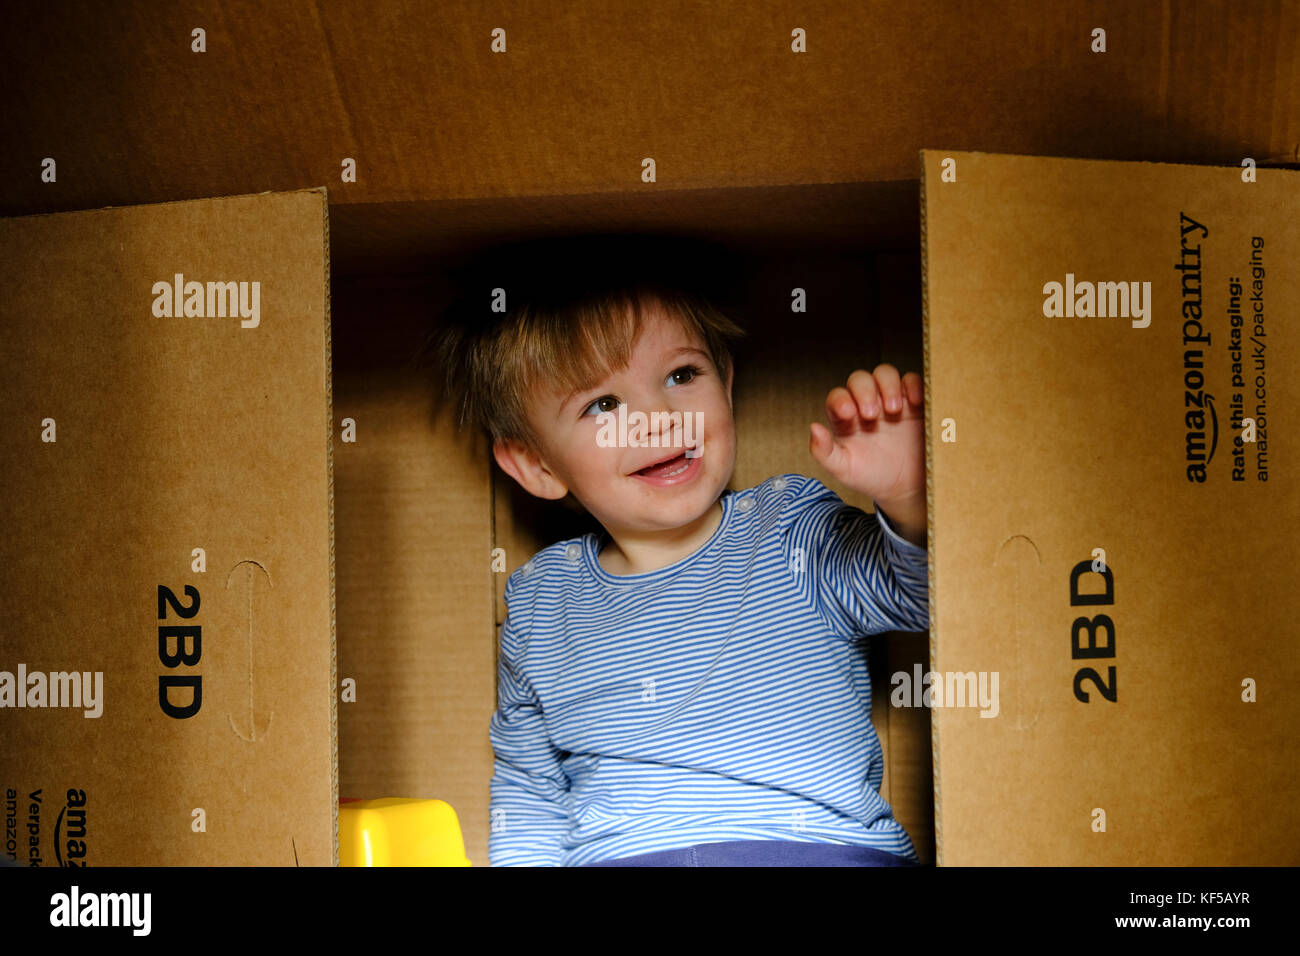 A toddler boy playing inside a large cardboard delivery box from Amazon  Stock Photo - Alamy